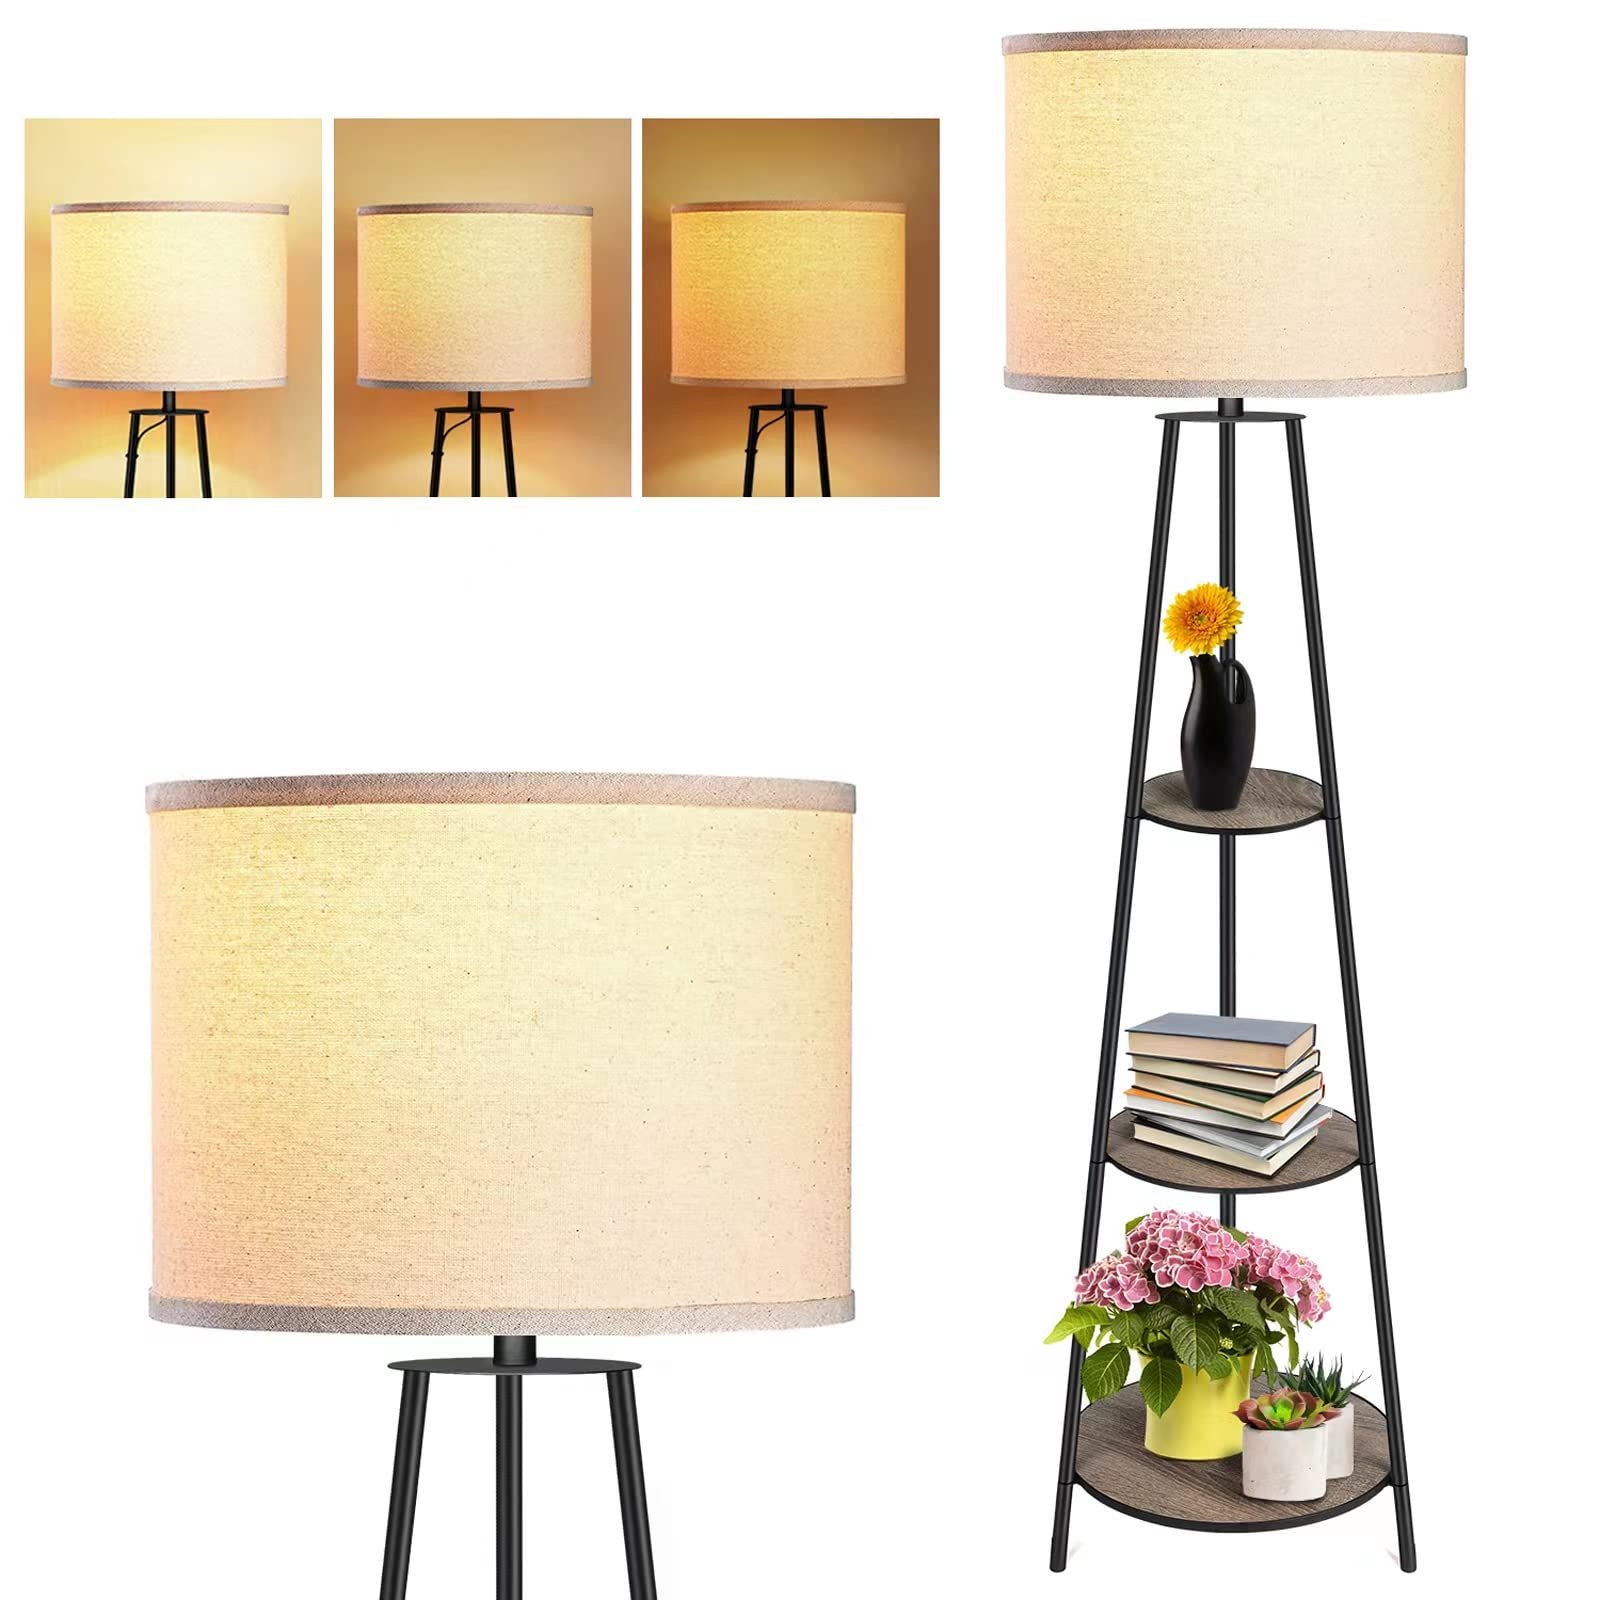 3 Tier Standing Lamps Inside Popular Amazon: Floor Lamp, 3 Tier Round Corner Shelf Floor Lamp With 3  Dimmable Levels – Simple Standing Lamp With White Fabric Shade, Tall Modern Floor  Lamps With Shelves For Bedroom, Living Room And (View 3 of 10)